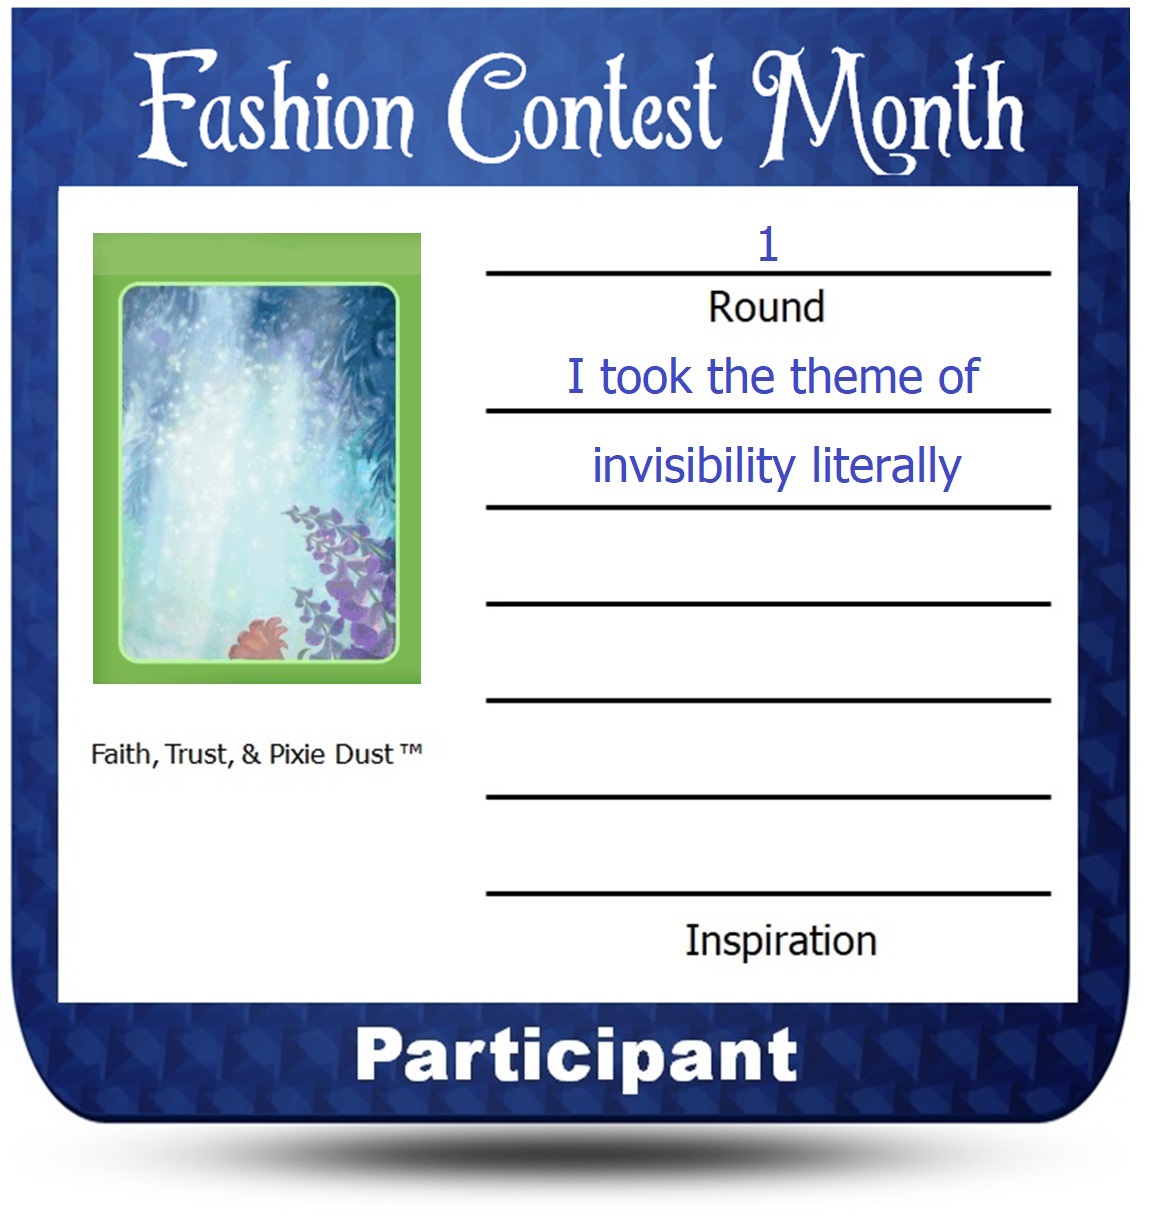 Participant Entry Template R1-3.jpg